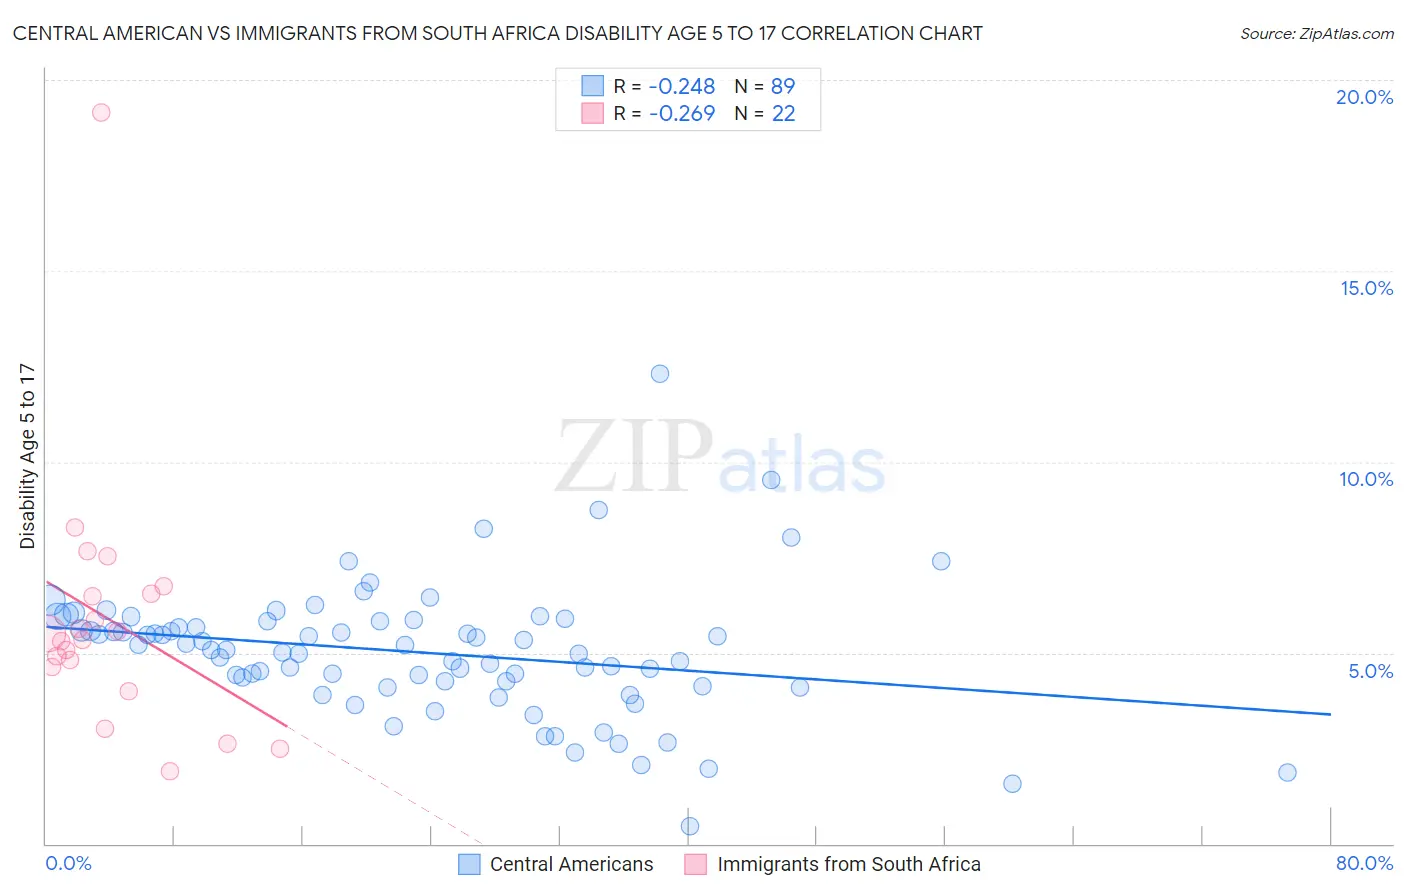 Central American vs Immigrants from South Africa Disability Age 5 to 17